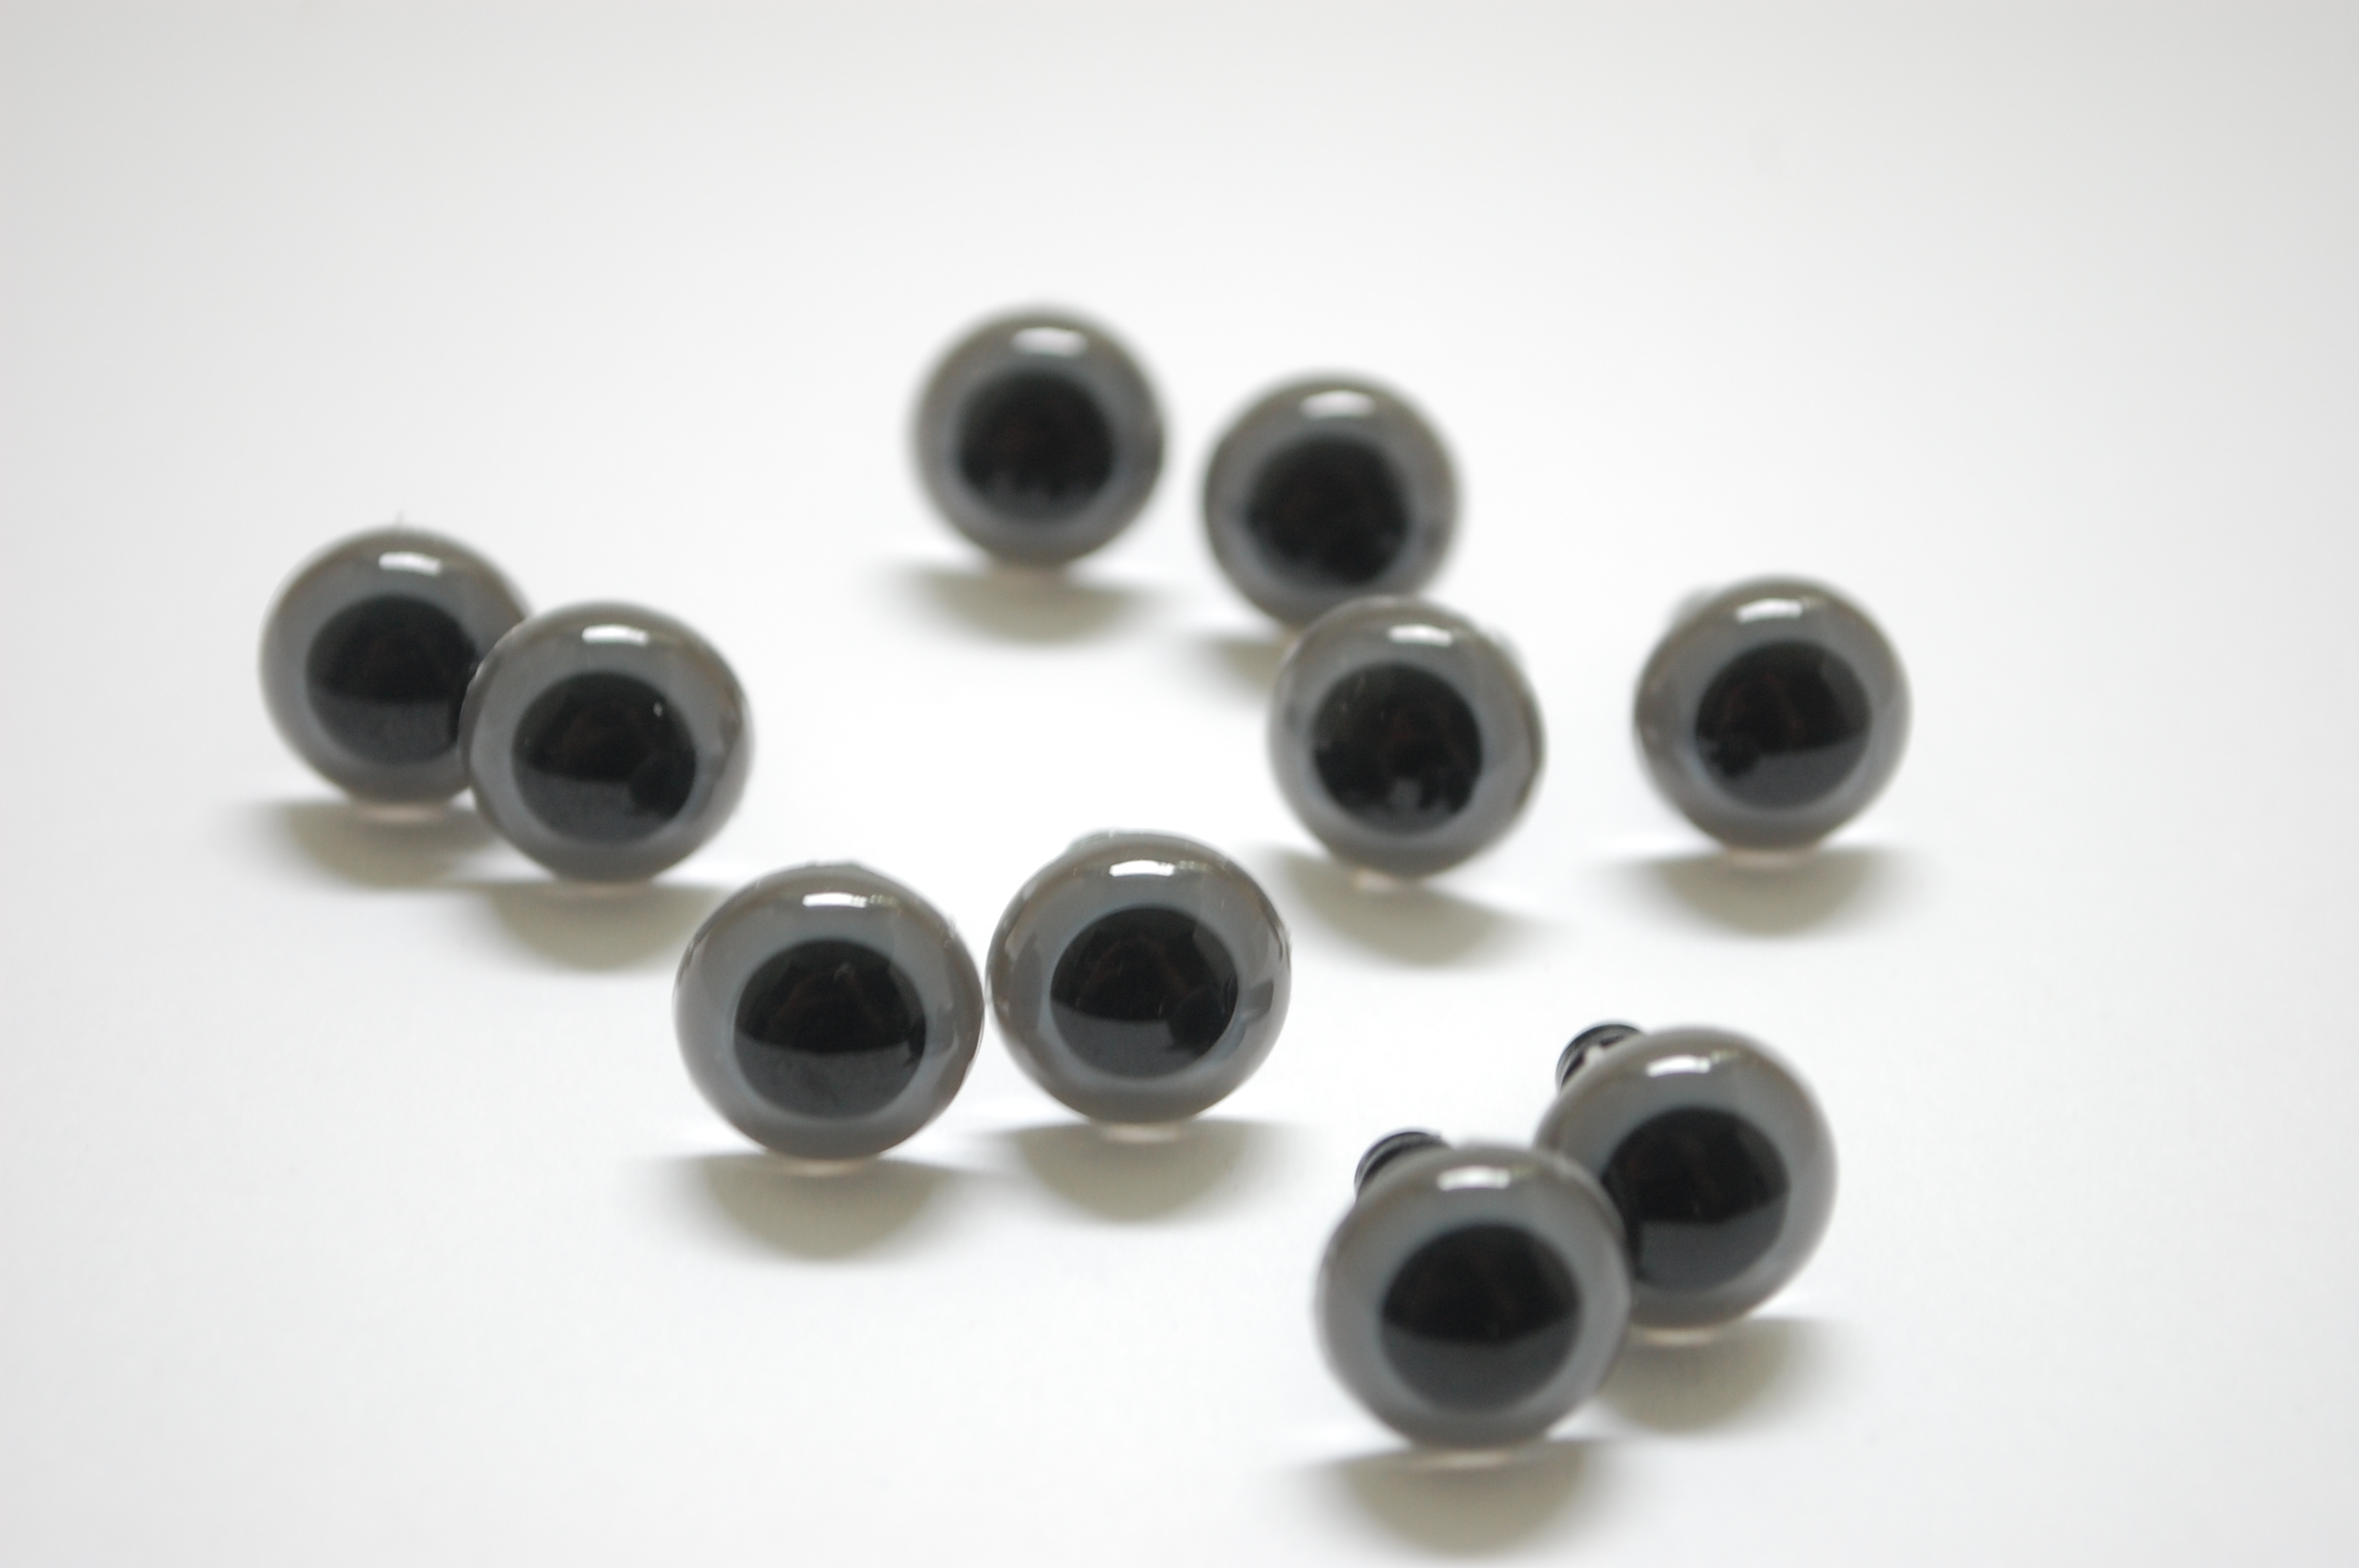 12mm White Safety Eyes with Black Centers - 5 Pairs 